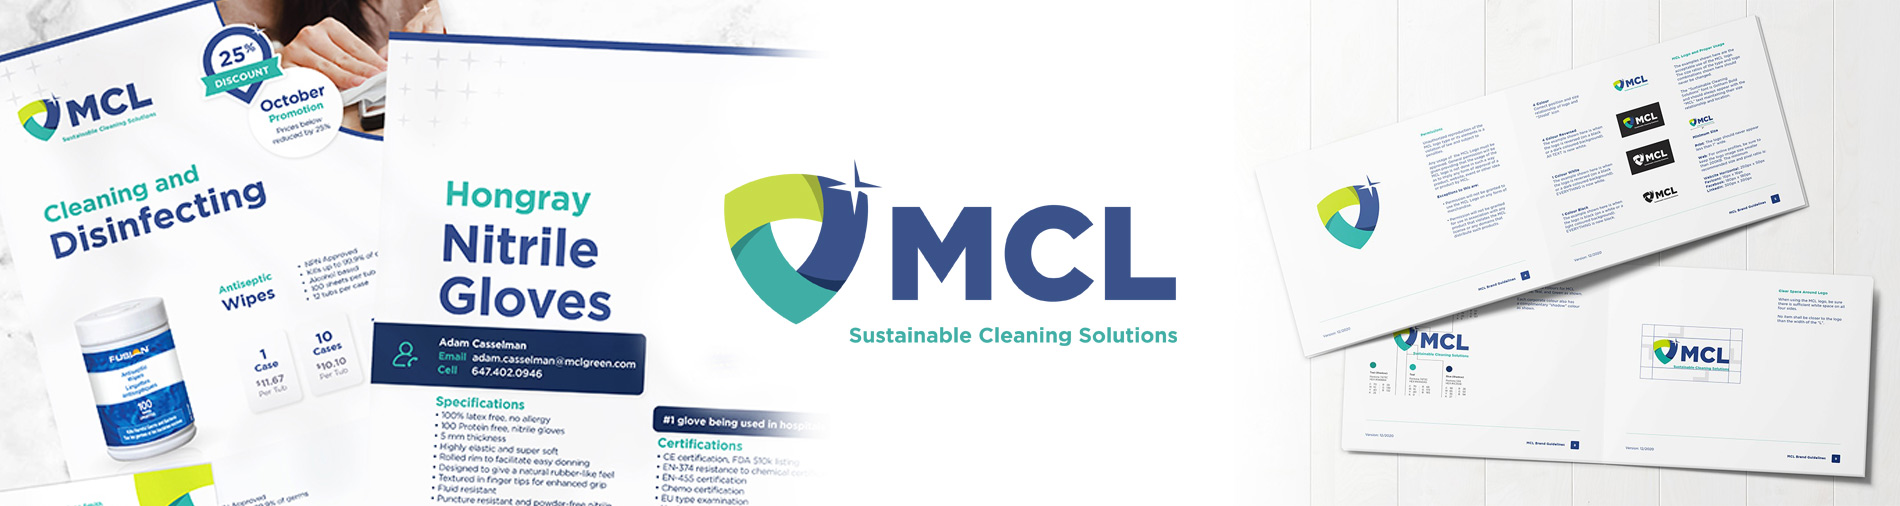 MCL Cleaning Solutions Full Branding & Ecommerce Web Development